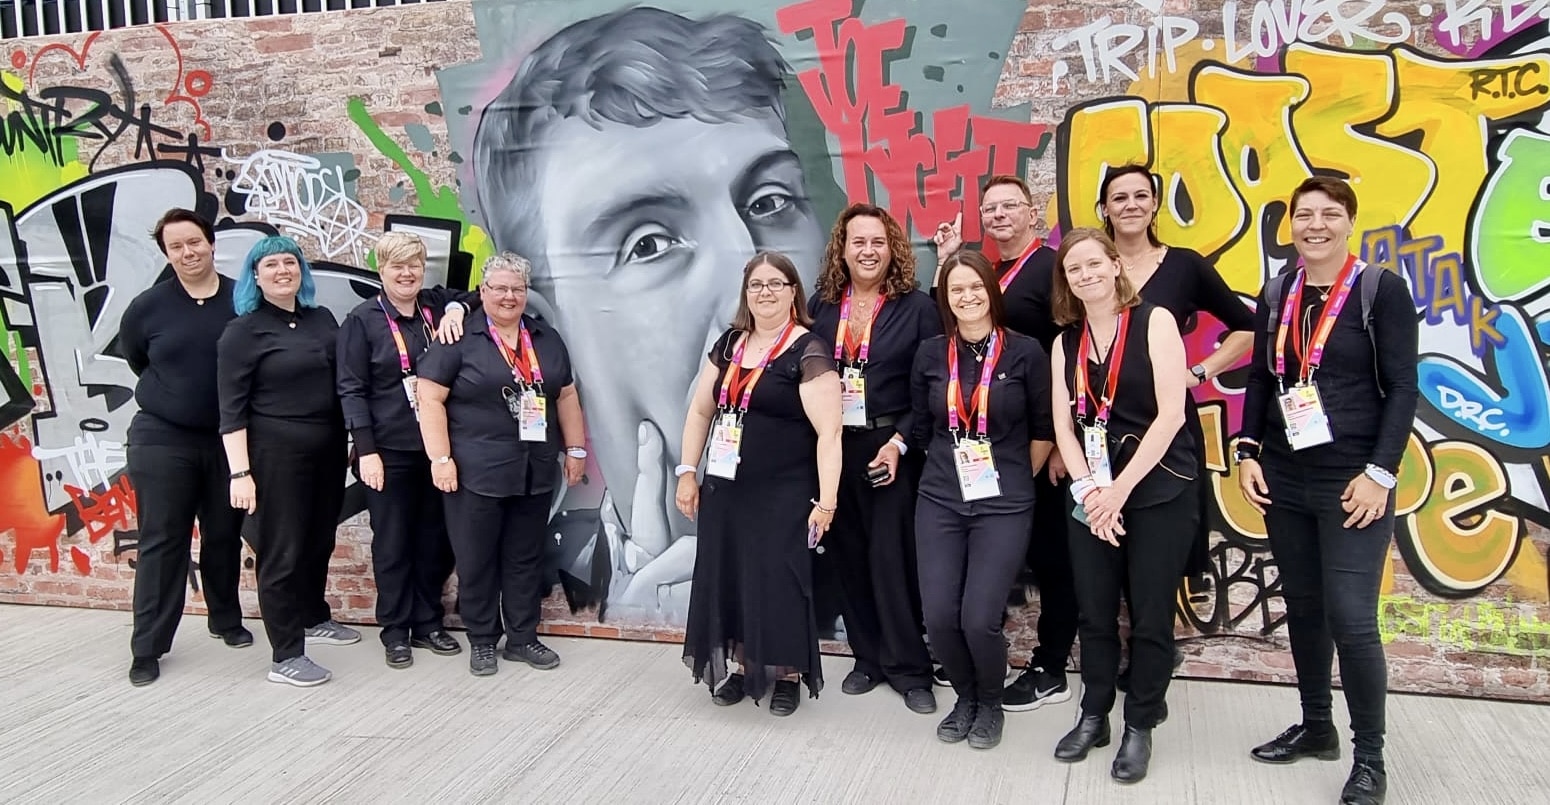 Rainbow voices choir - A group of choir members pose in front of a colourful graffiti wall.